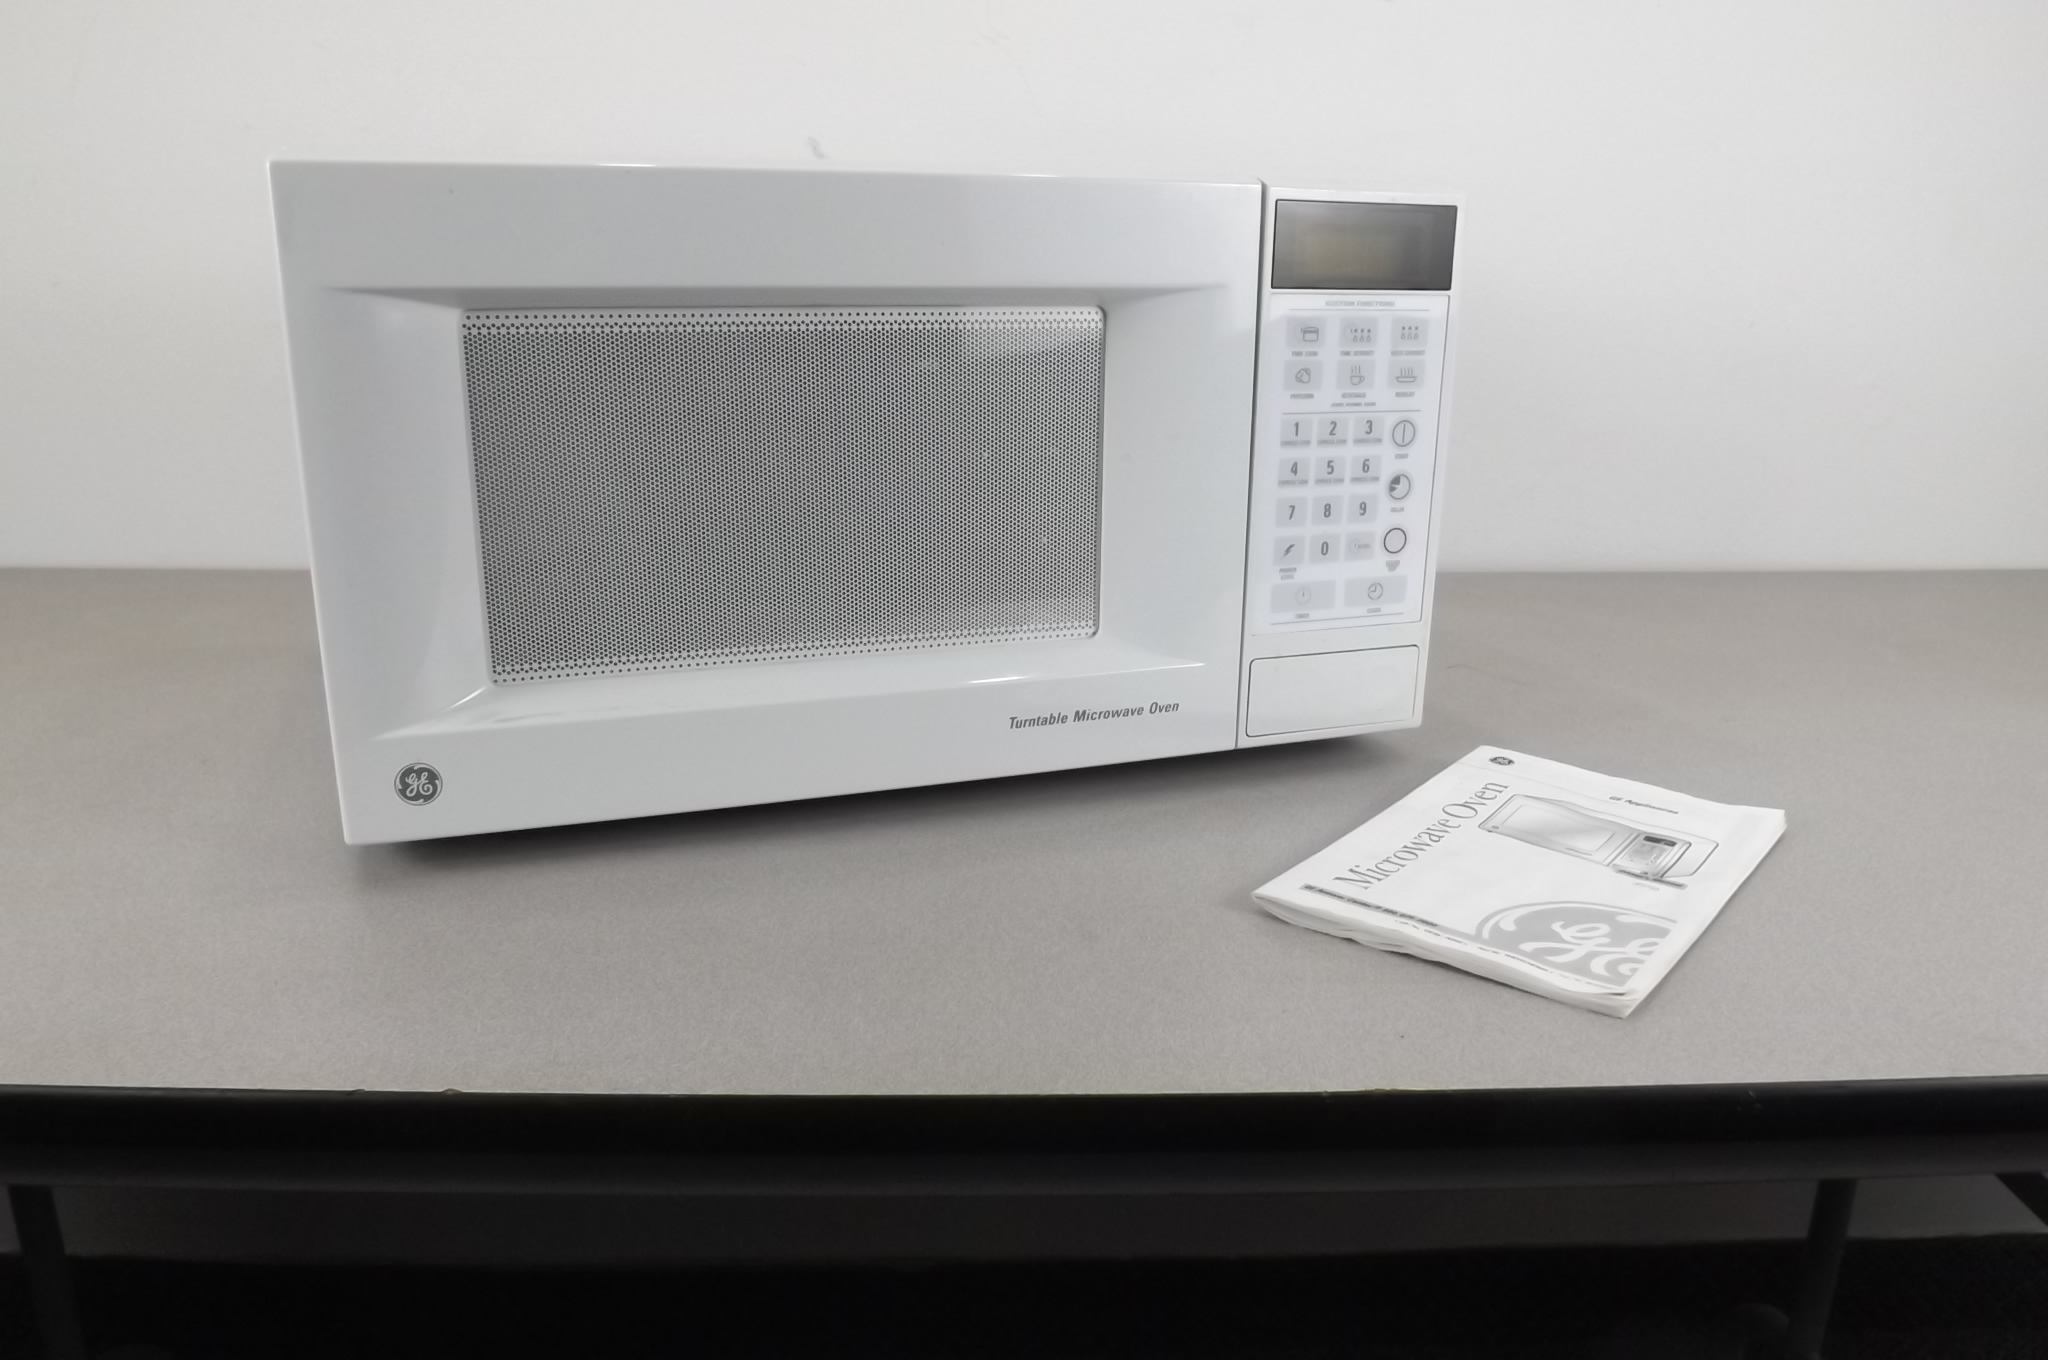 GE Turntable Microwave Oven | EC #171 Estate Collectibles, Coins